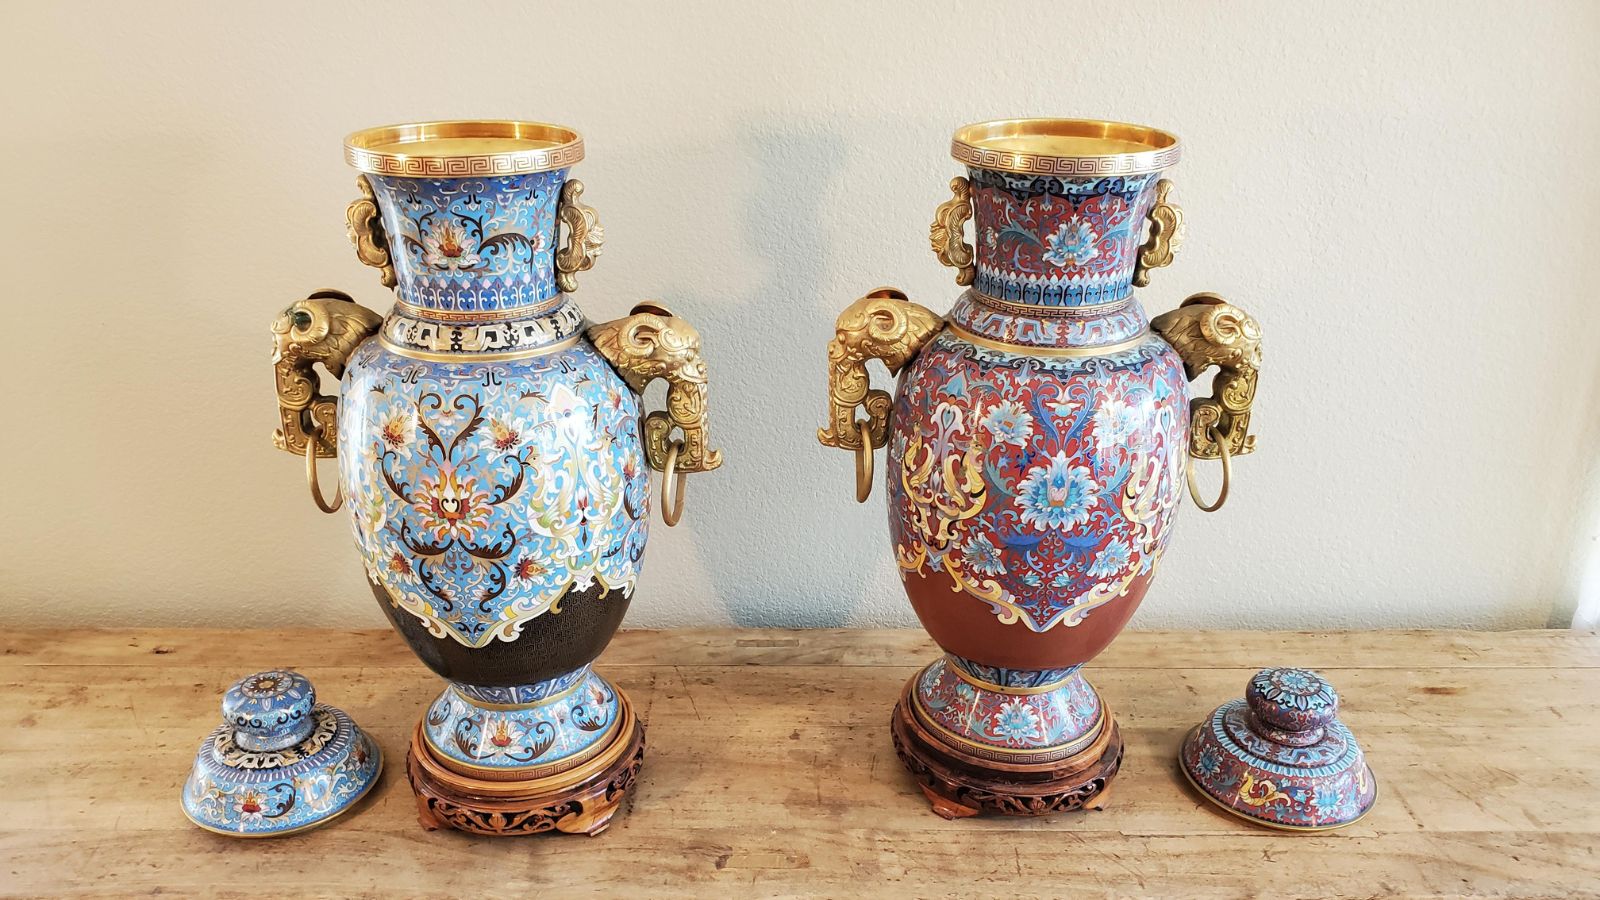 How to Identify Antique Chinese Vase